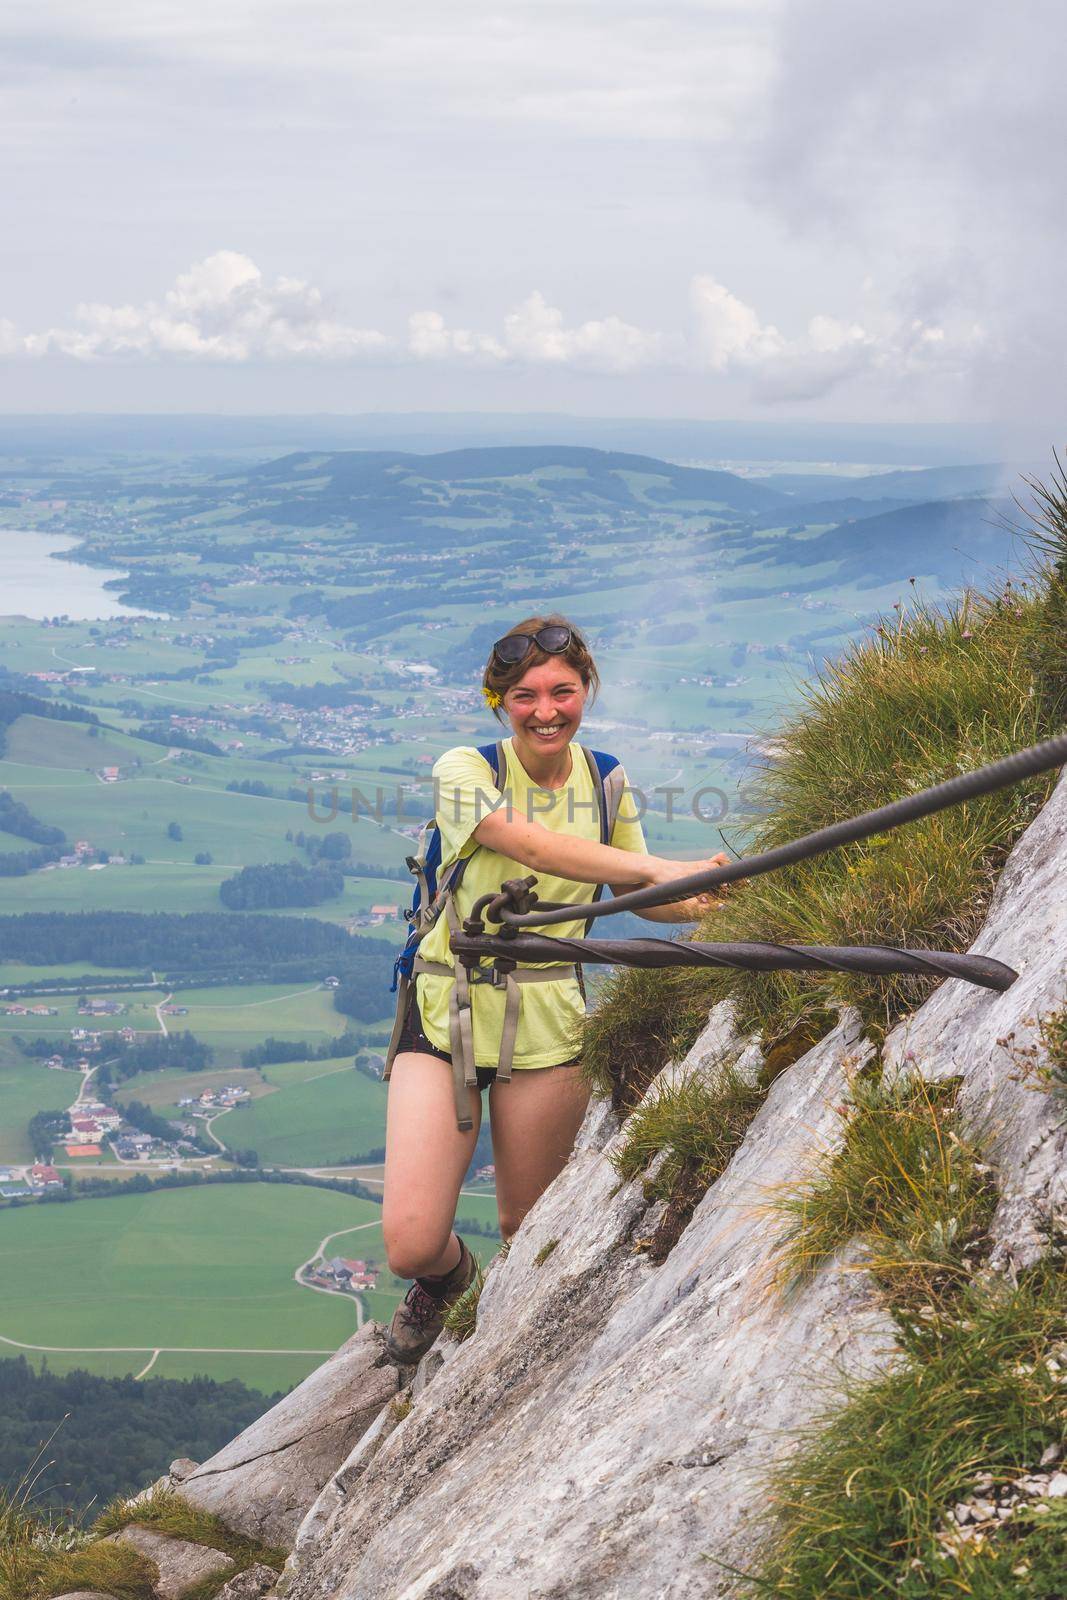 Adventure in the mountains. Young tourist girl is climbing on rocky mountain in Austria by Daxenbichler